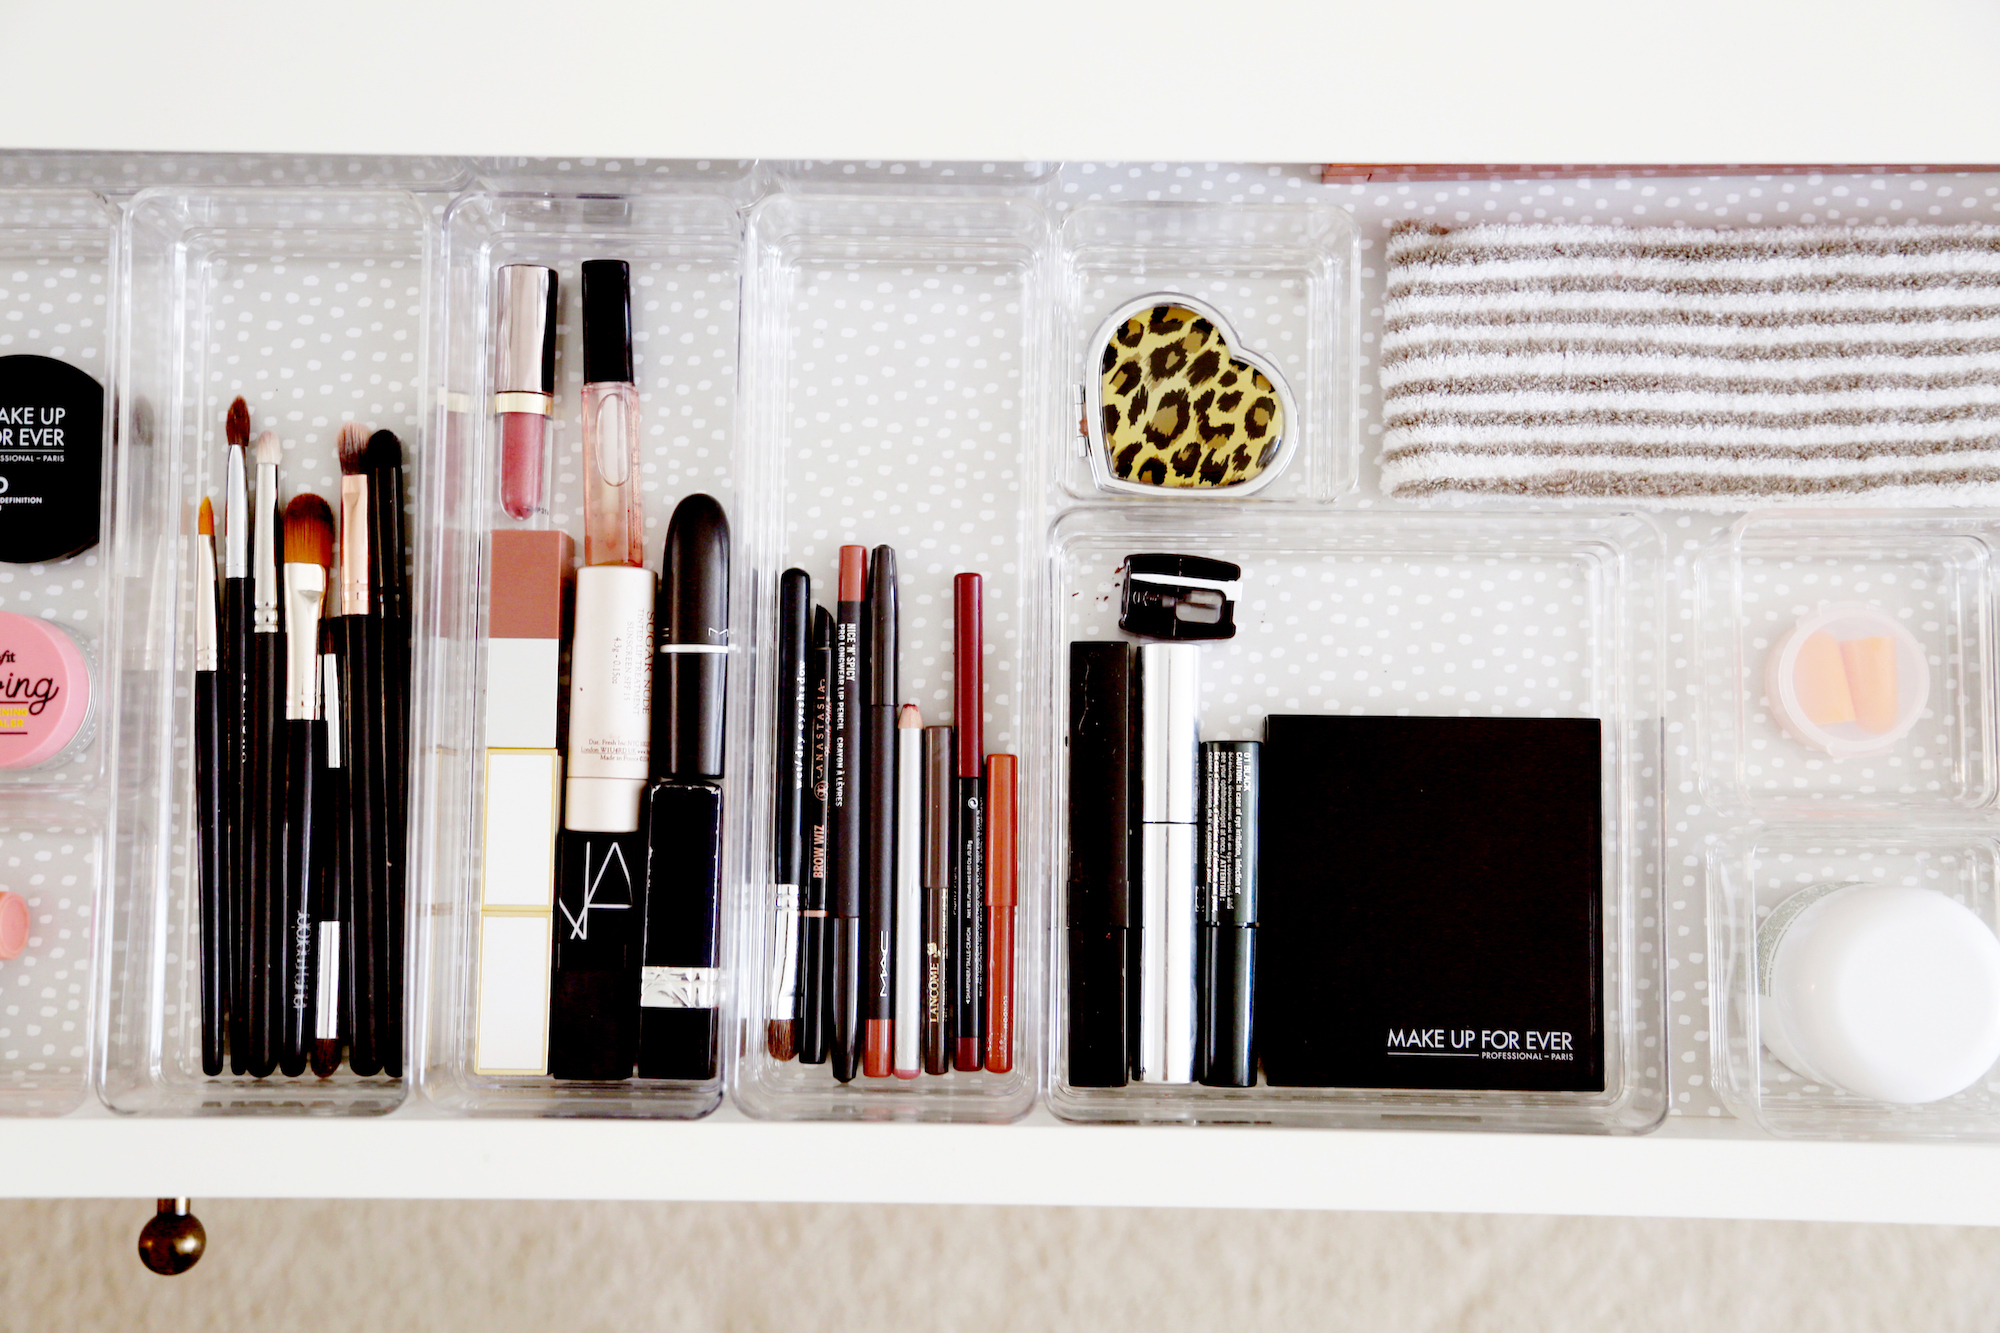 How to edit & organize your makeup on the go